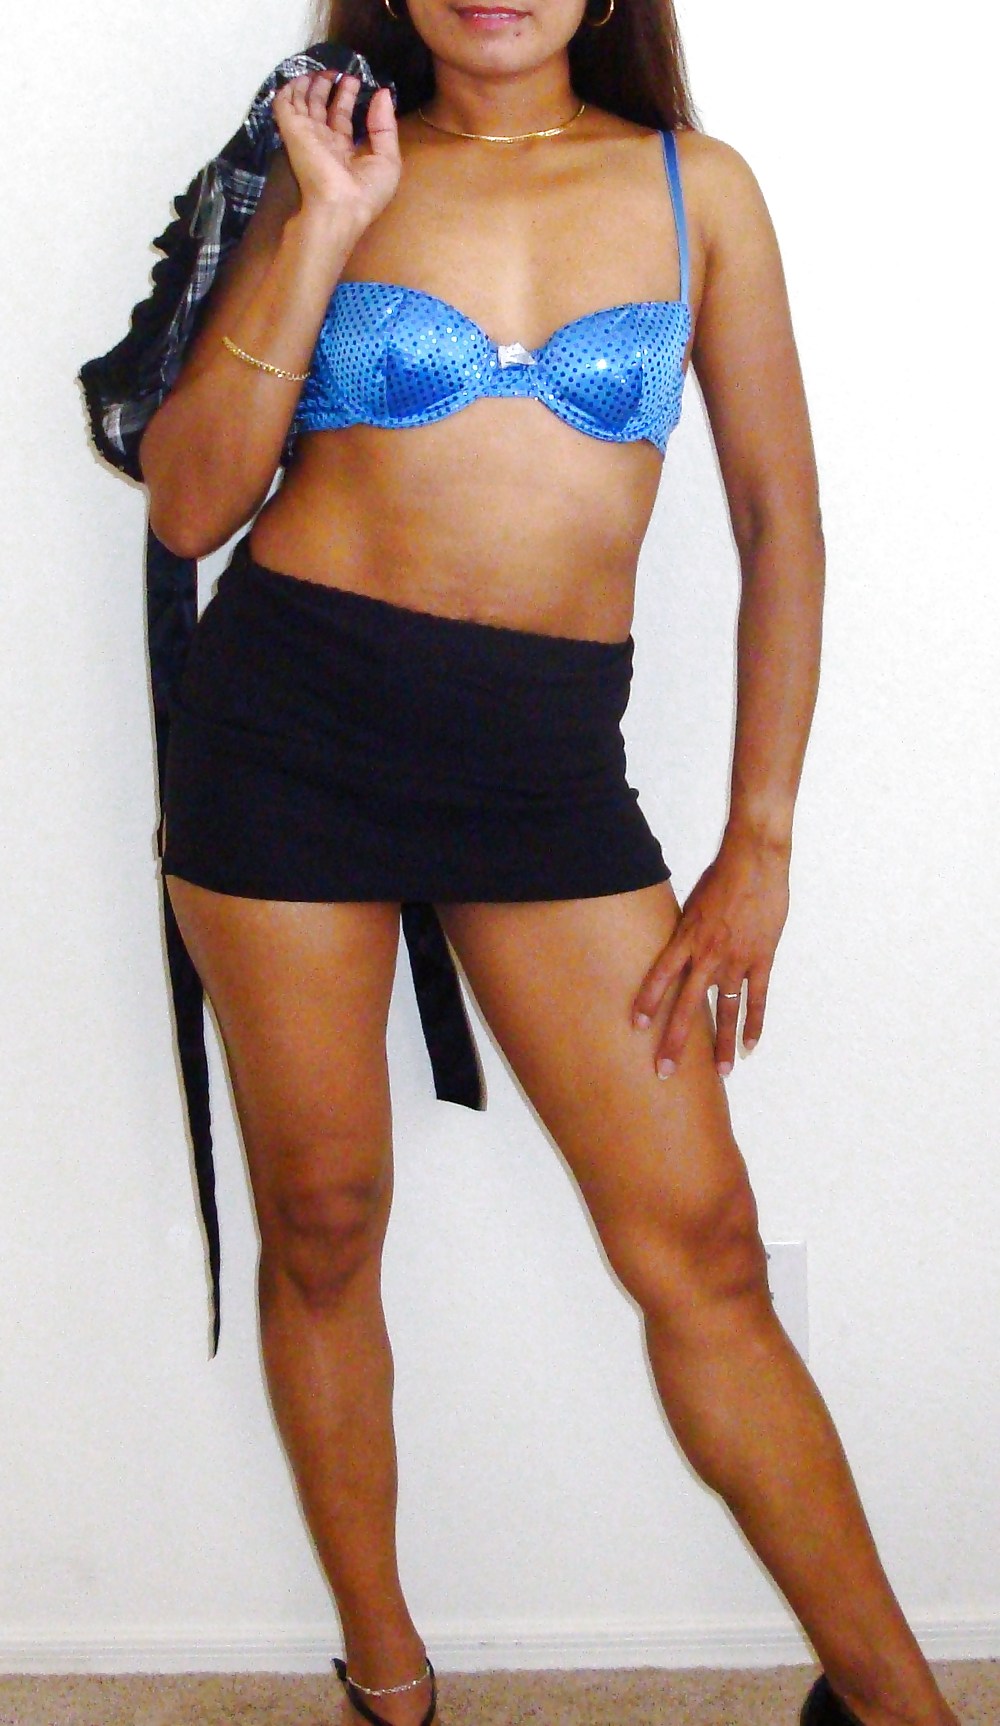 Baby Doll, Going out to the Pool! #2177367